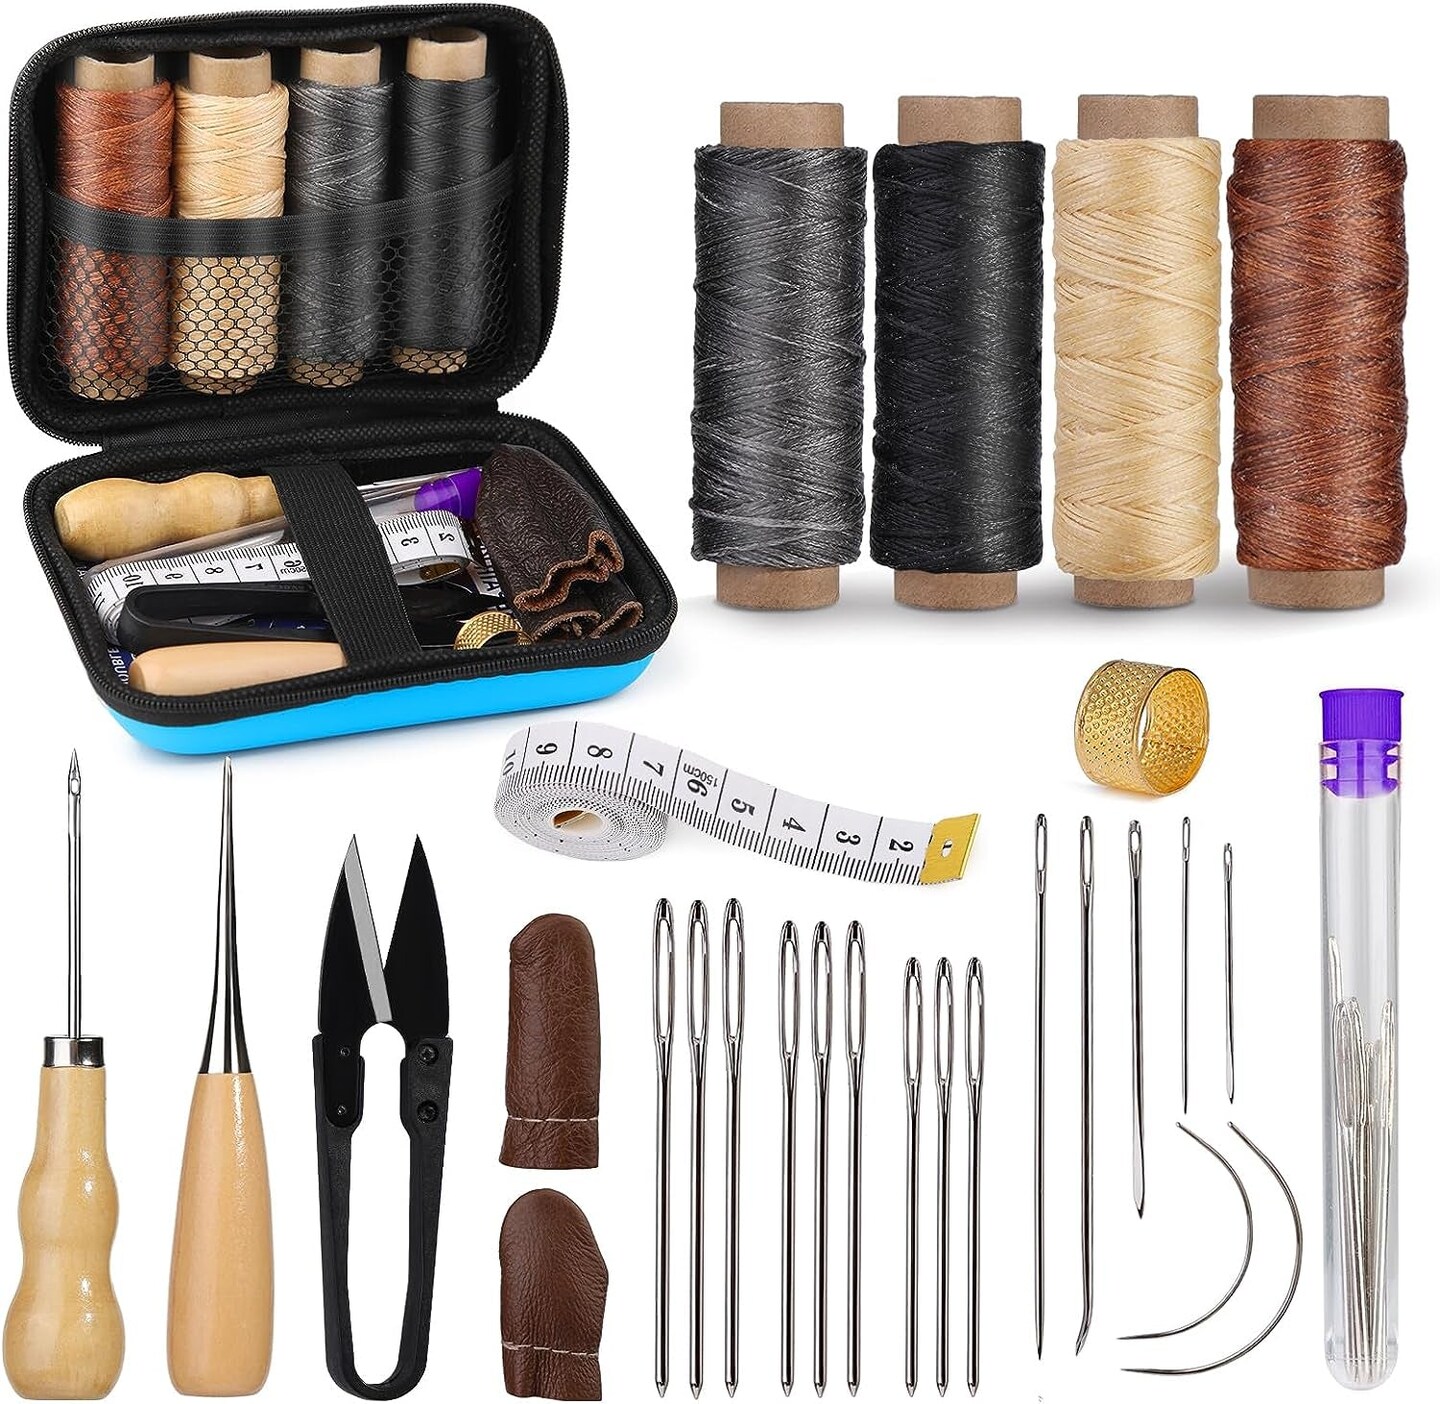 Basic Leatherworking Tools and Supplies – Leather Artisans